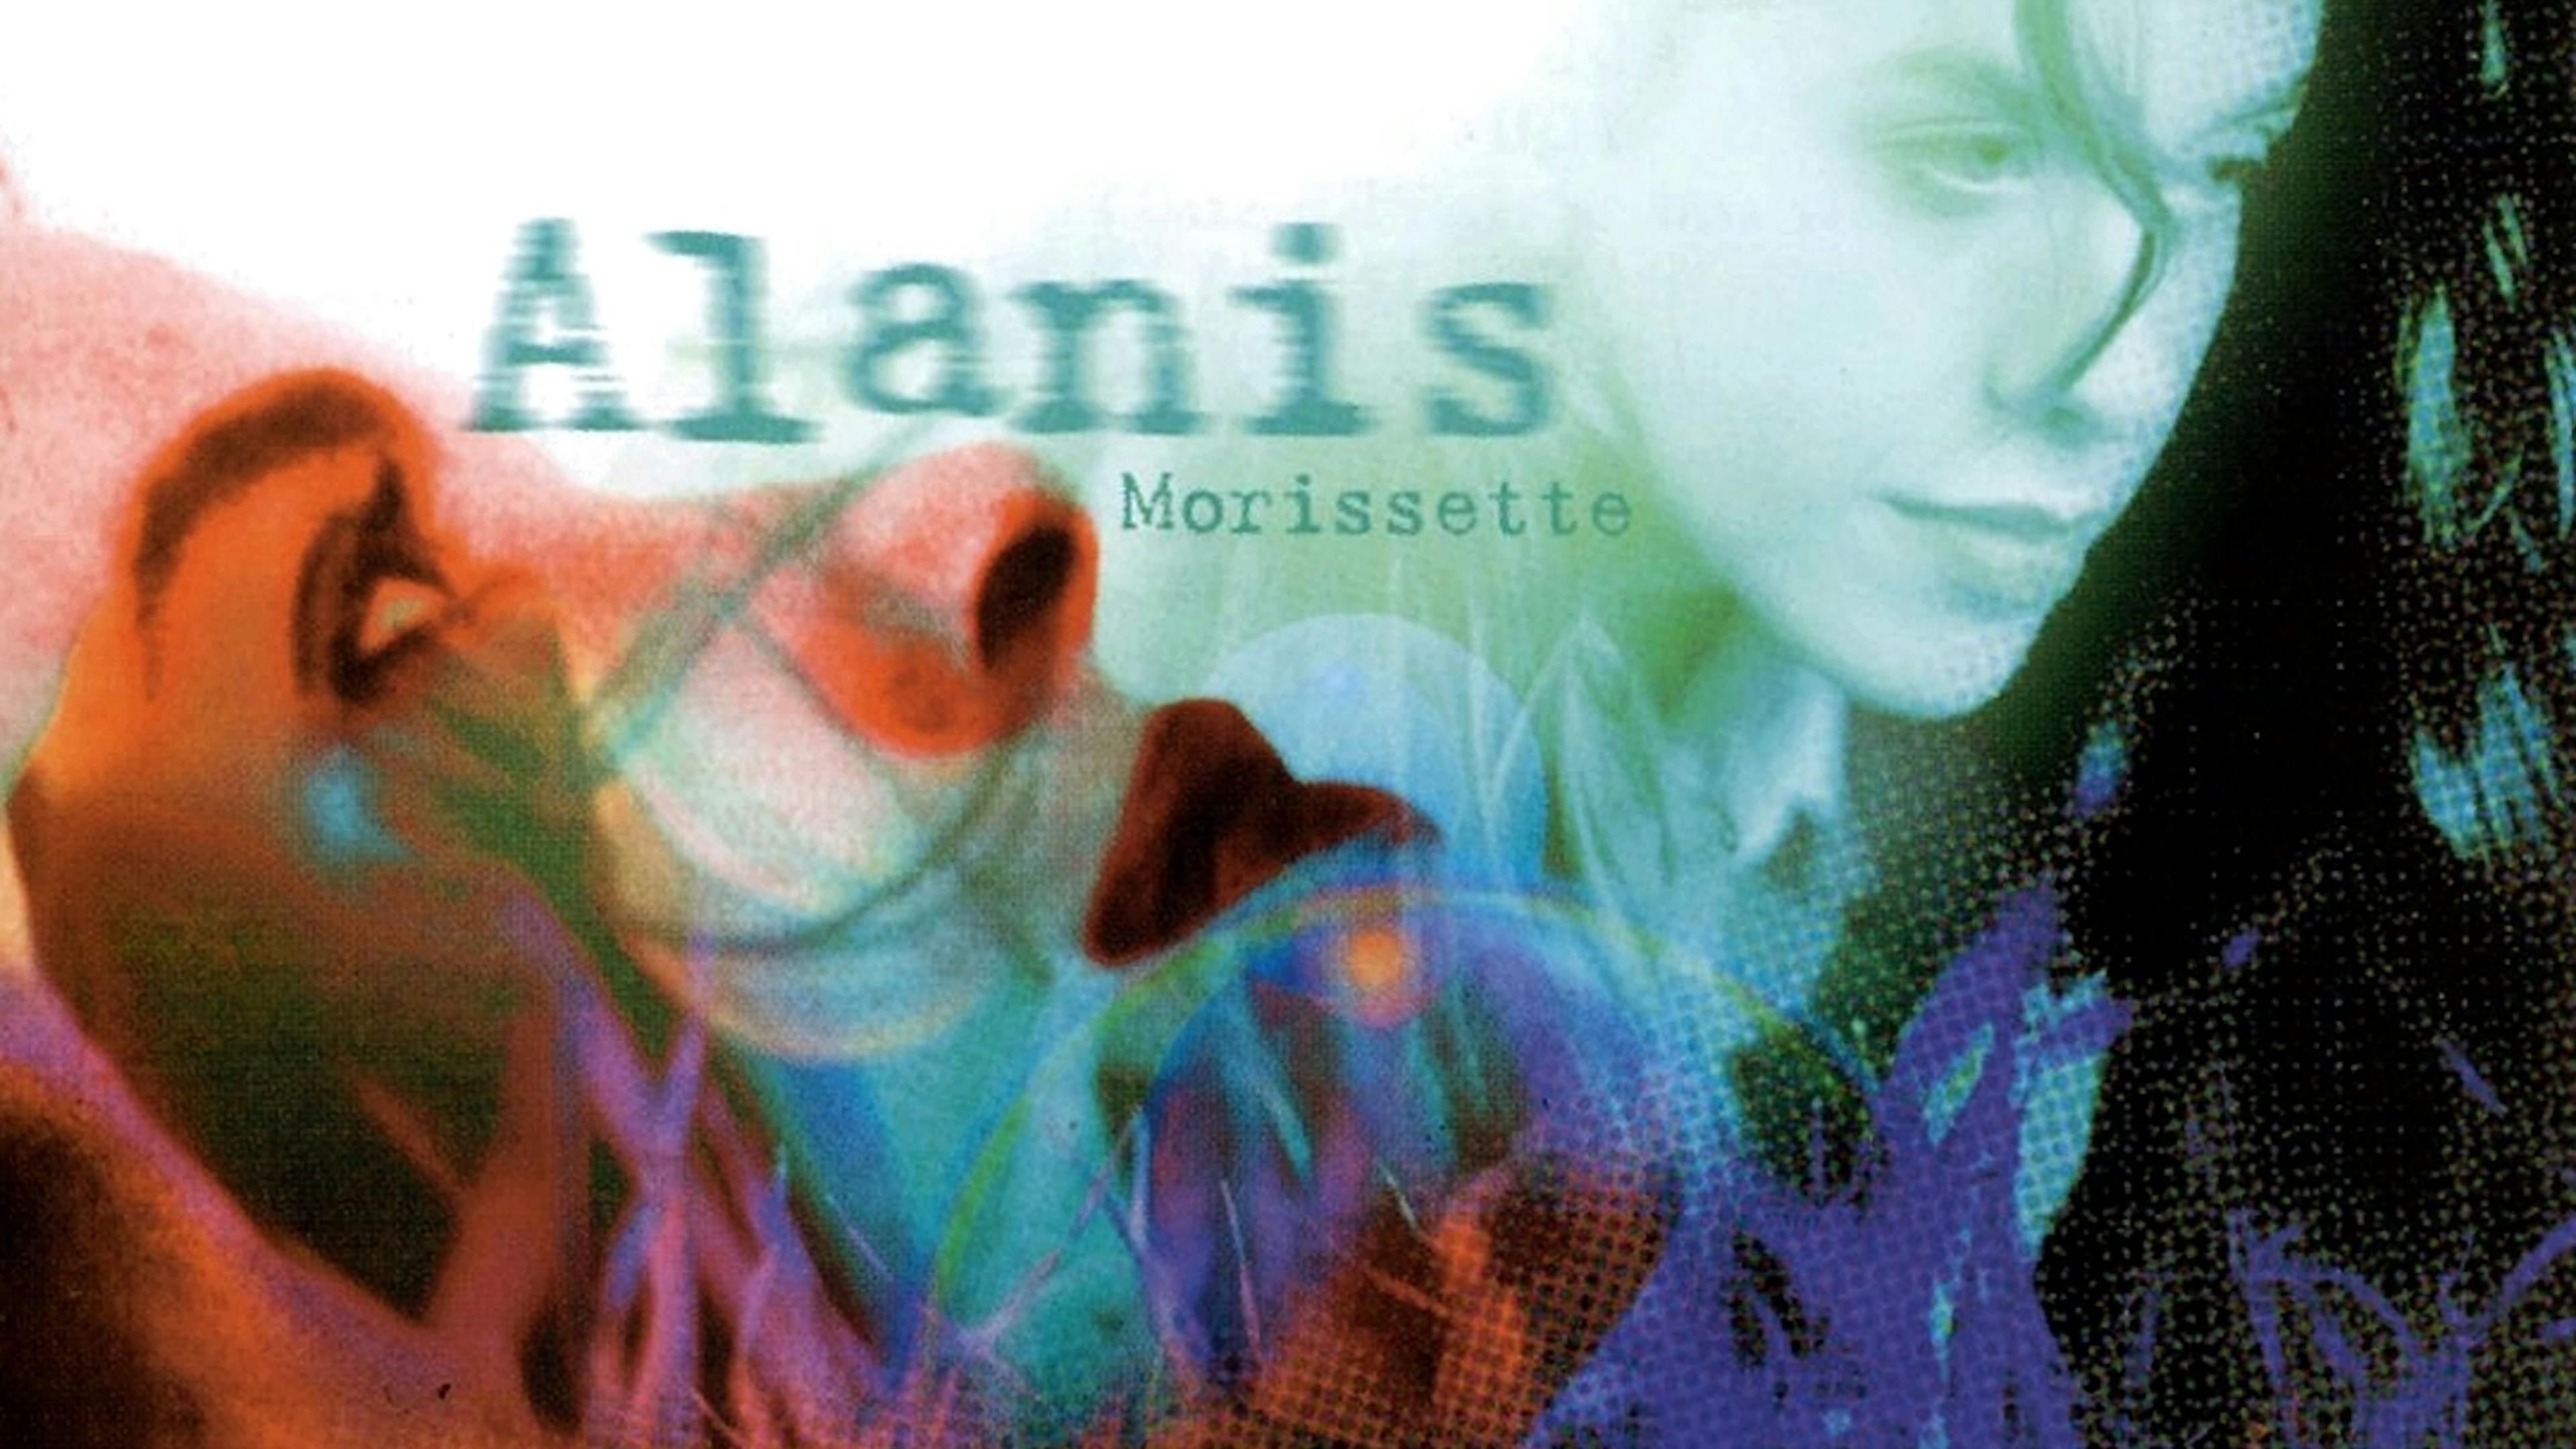 Alanis Morissette's Jagged Little Pill Freed My Angry Voice